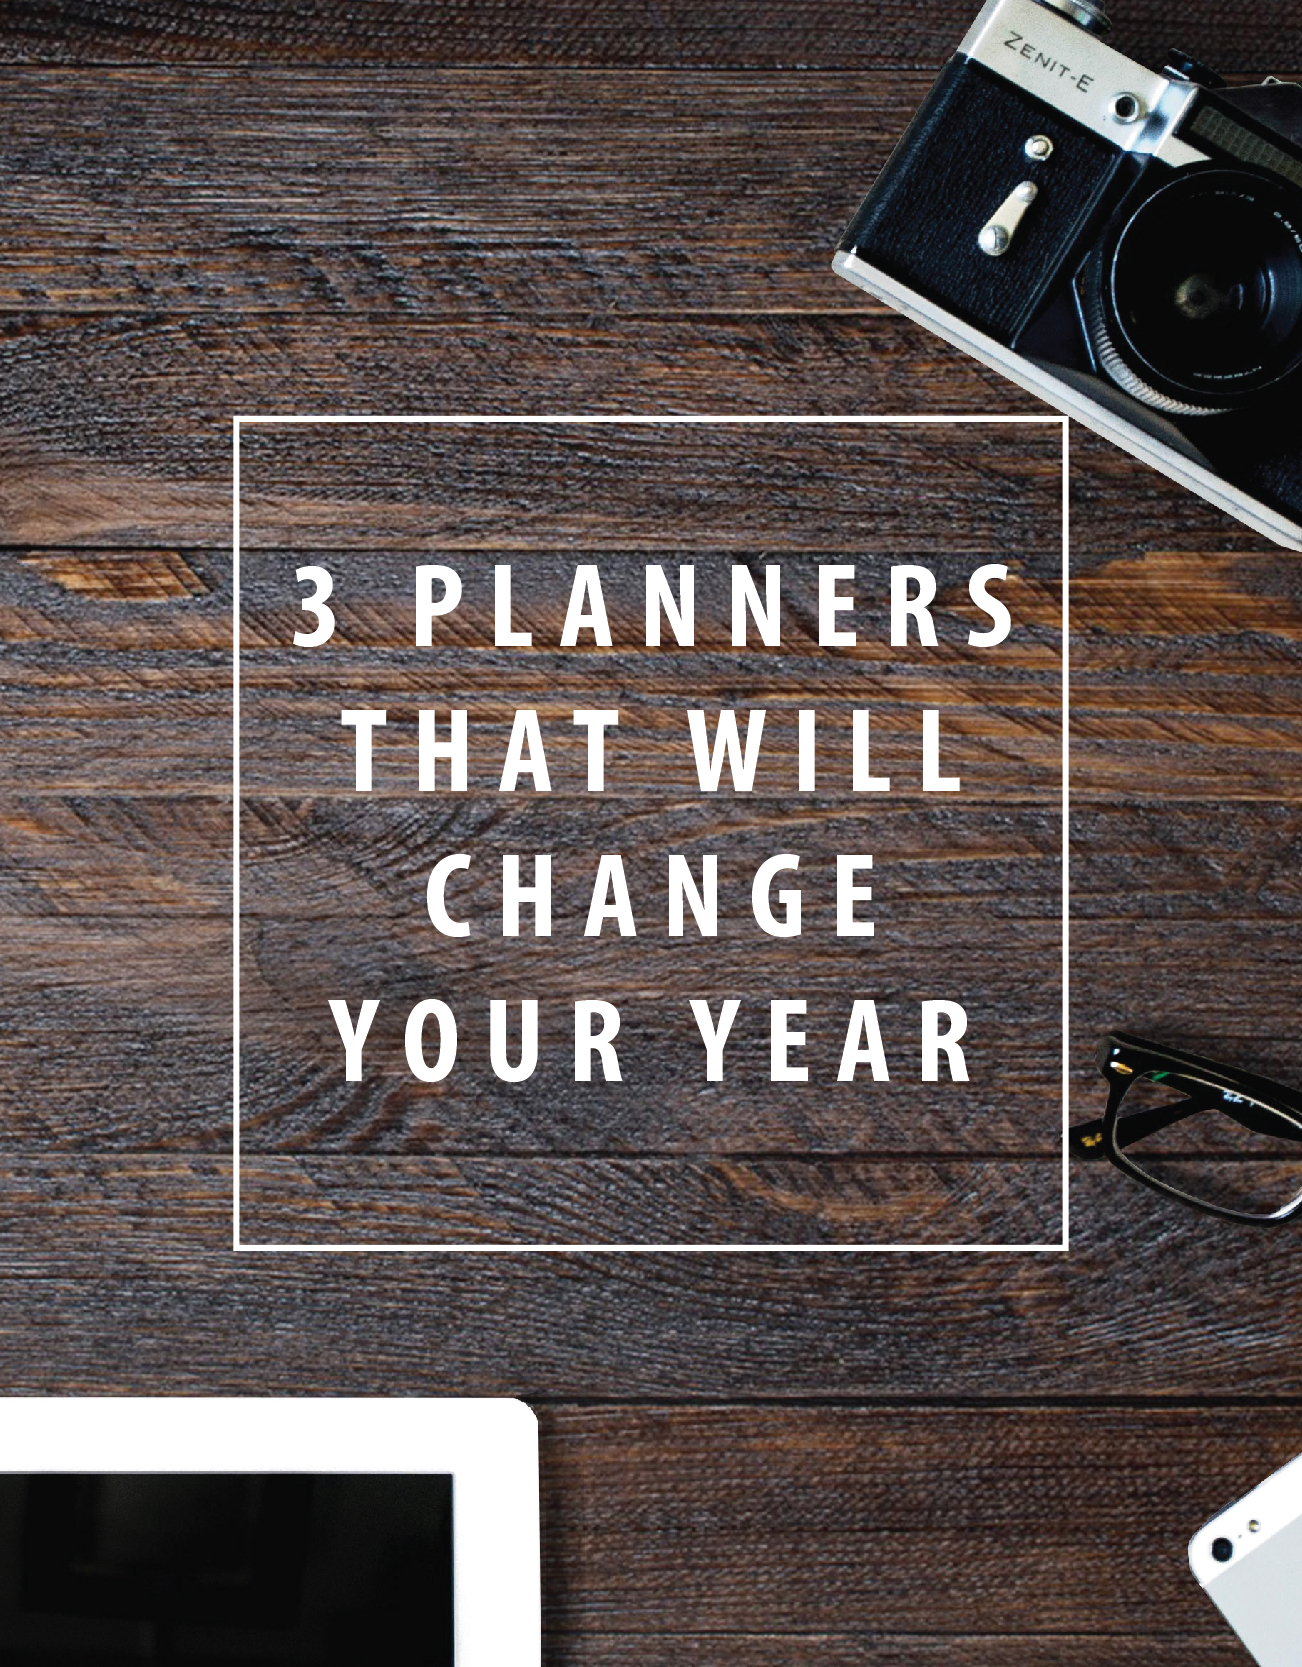 3 planners that will change your year